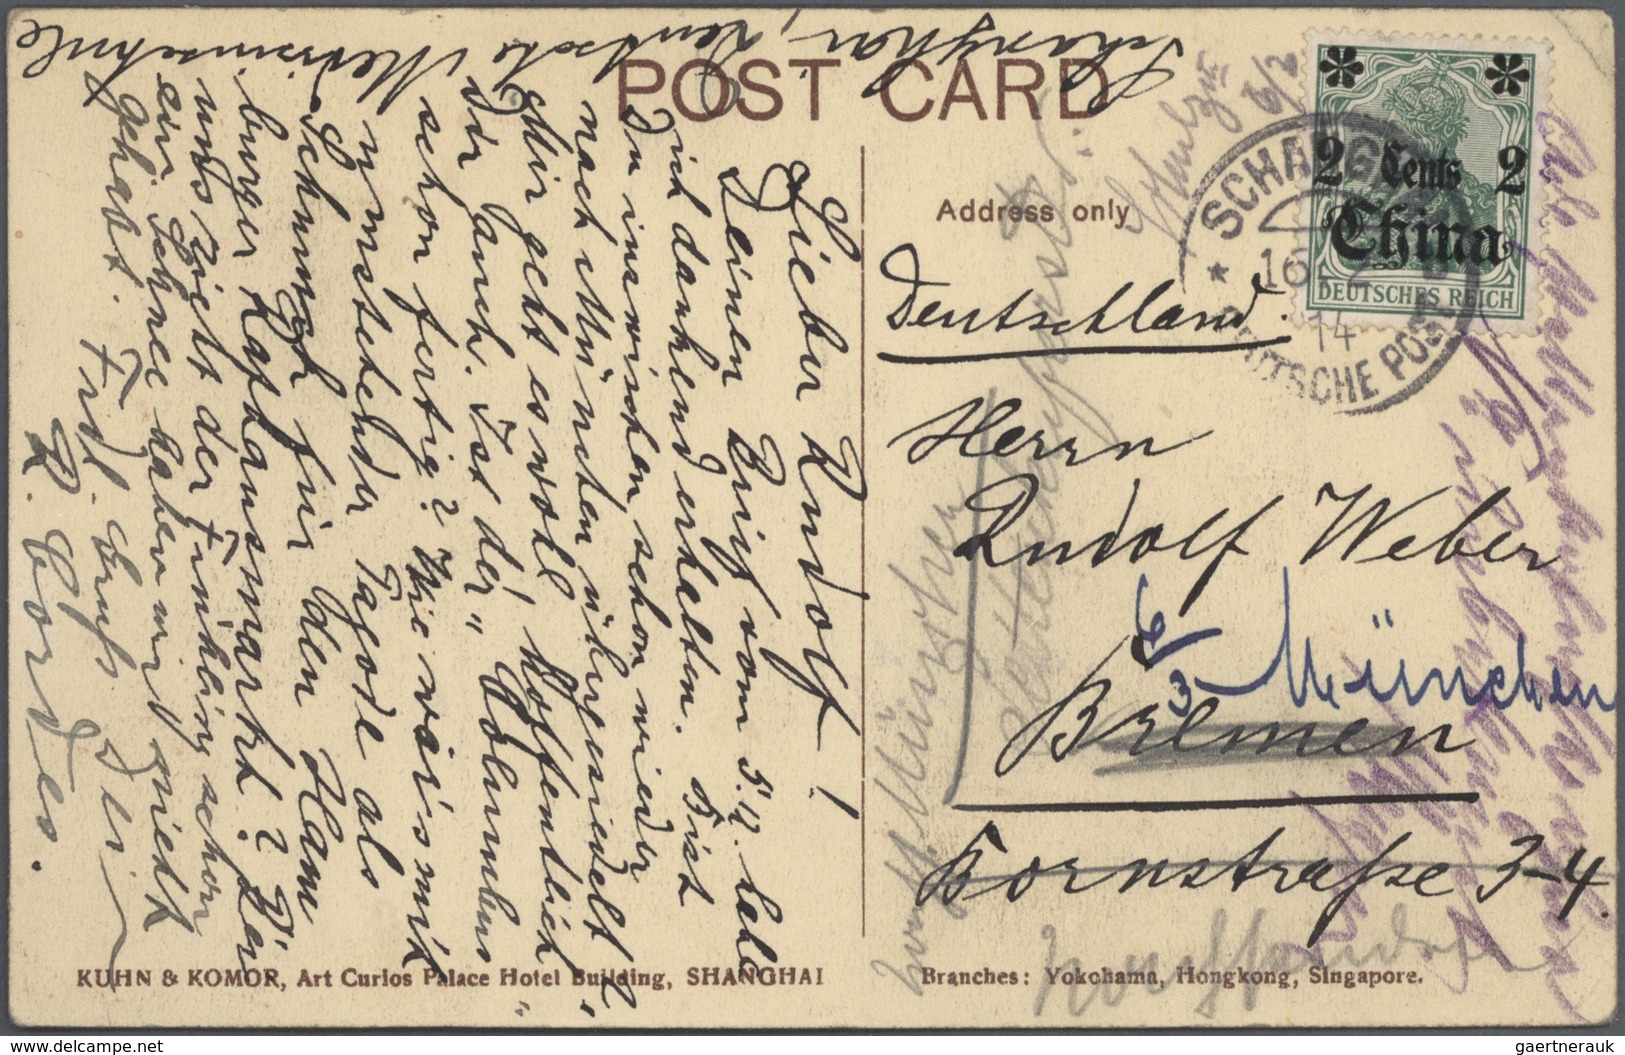 Br/GA/ China: 1897/1948, covers (2, inc. german currency control), stationery mint/used (12), HK franked wr